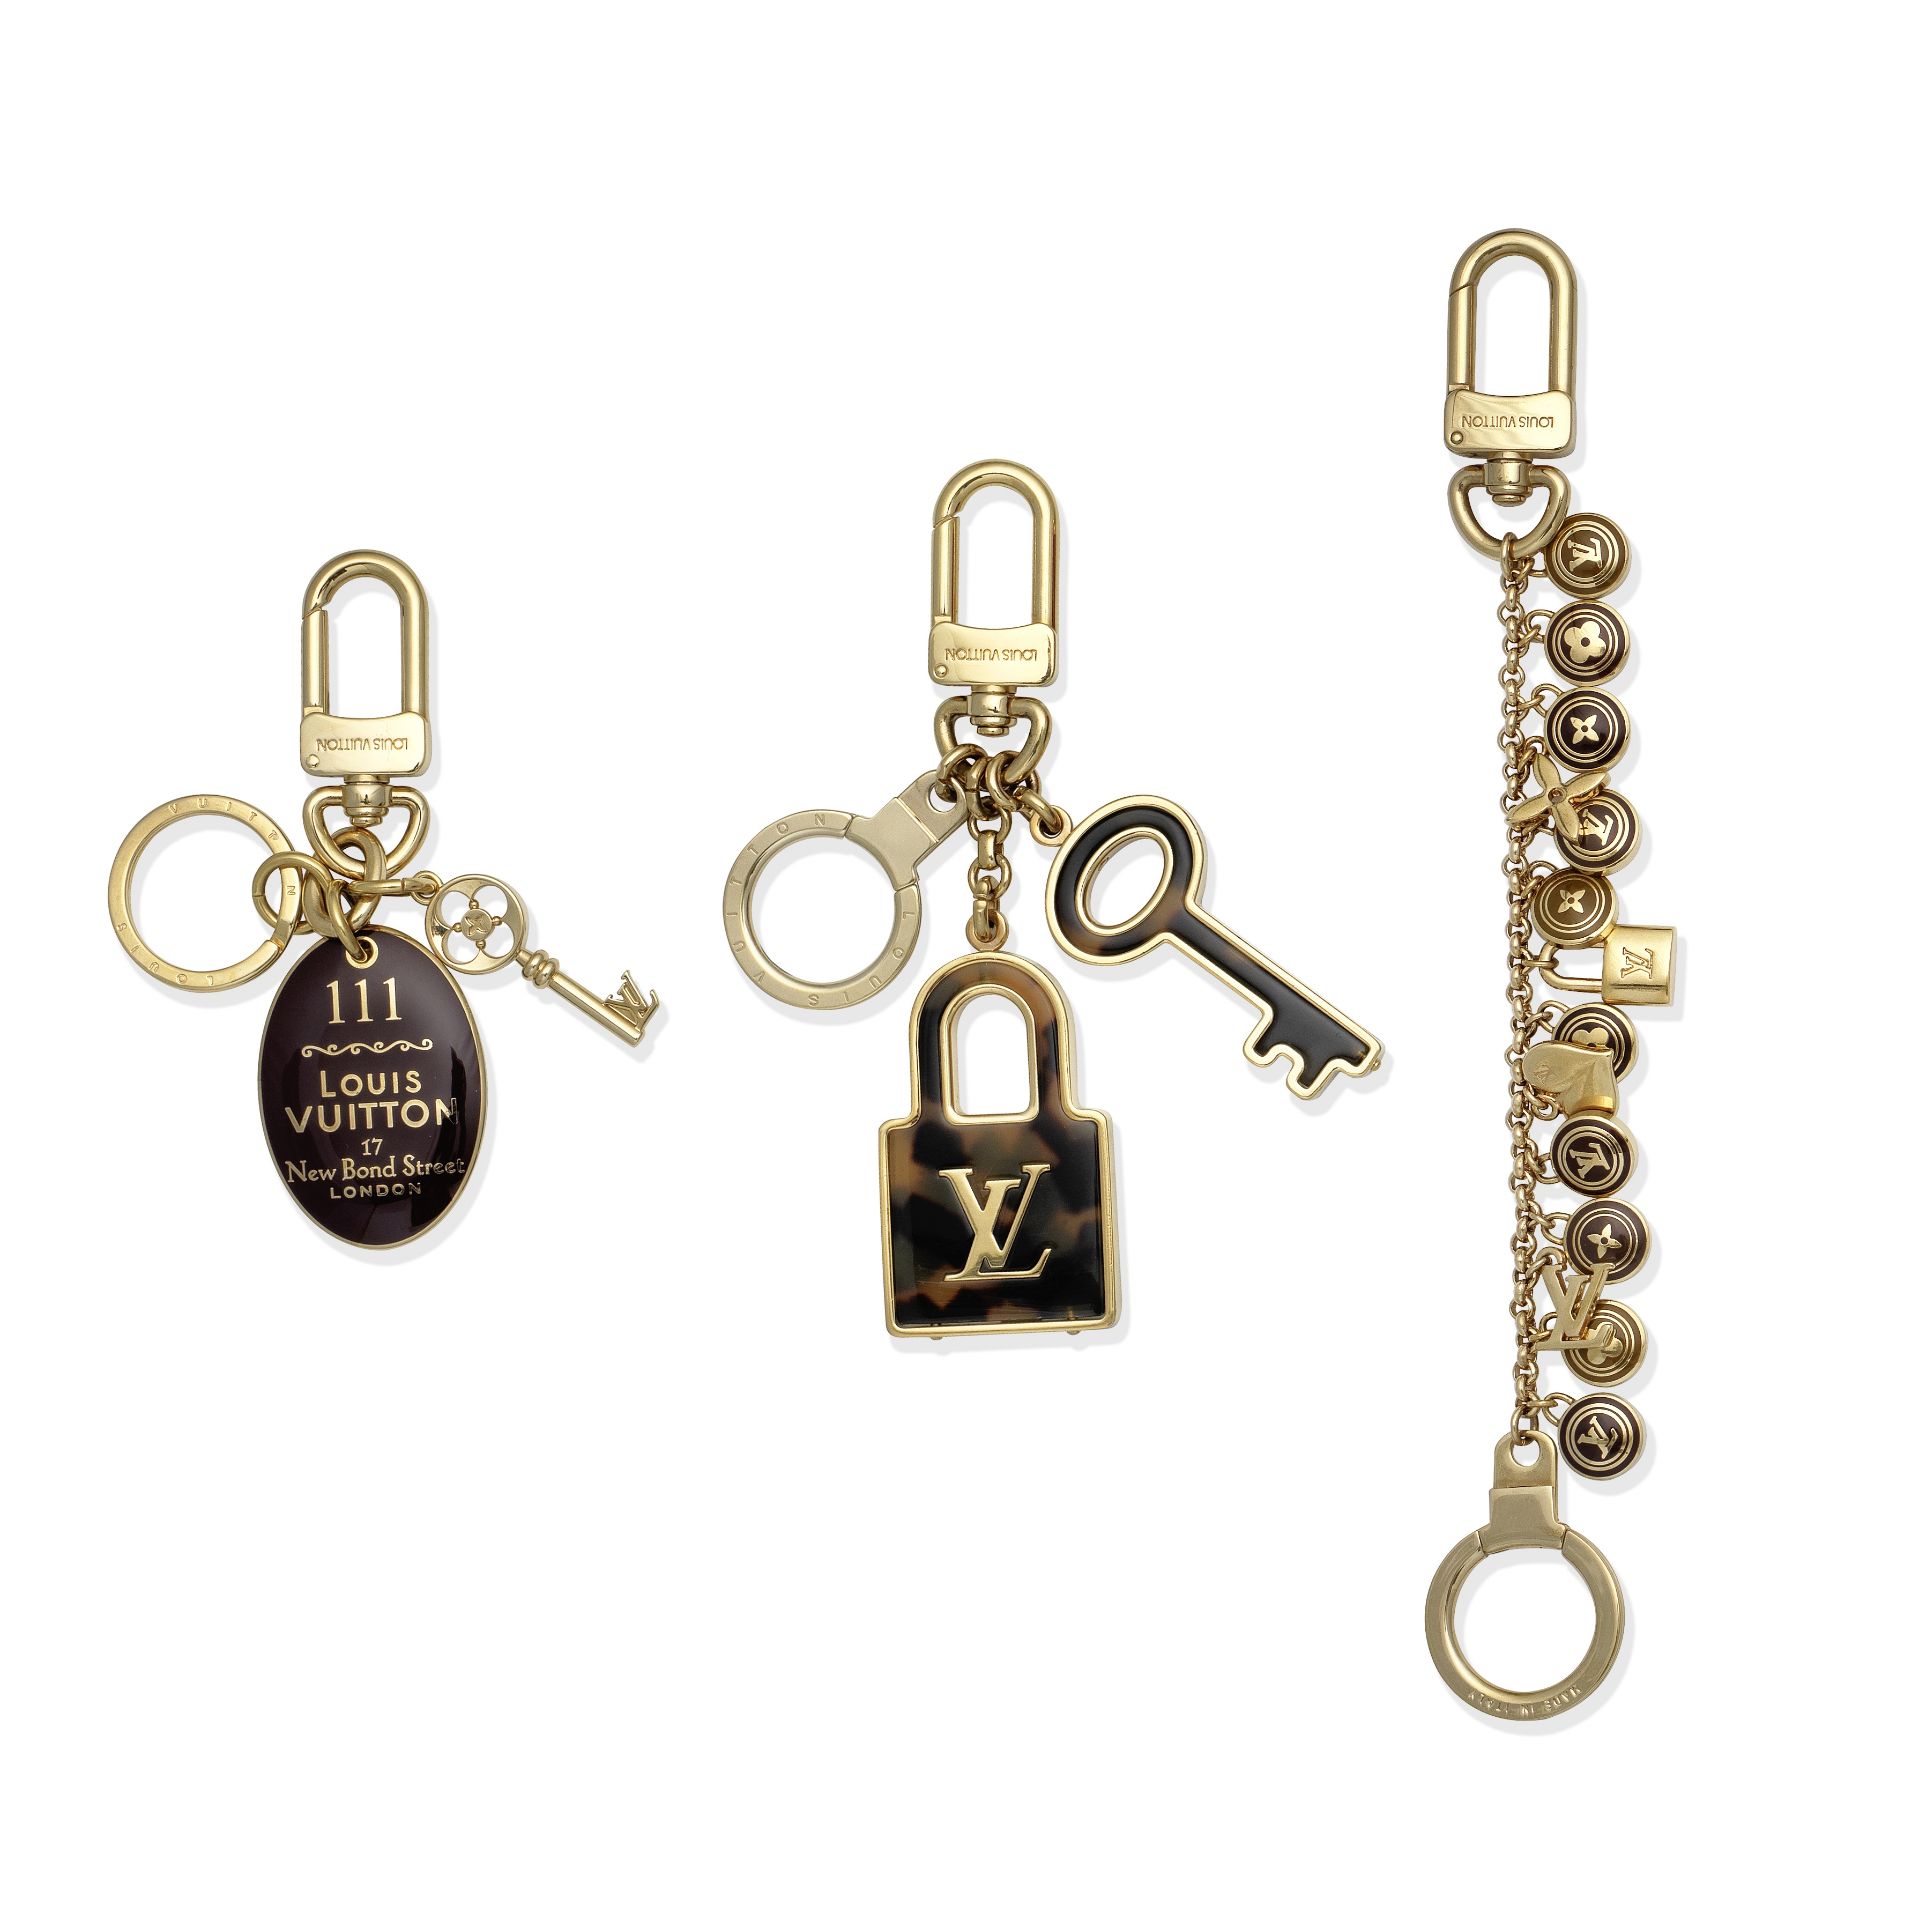 Three Bag Charms/ Key Chains, Louis Vuitton, c. 2012, (Includes dust bags and boxes)